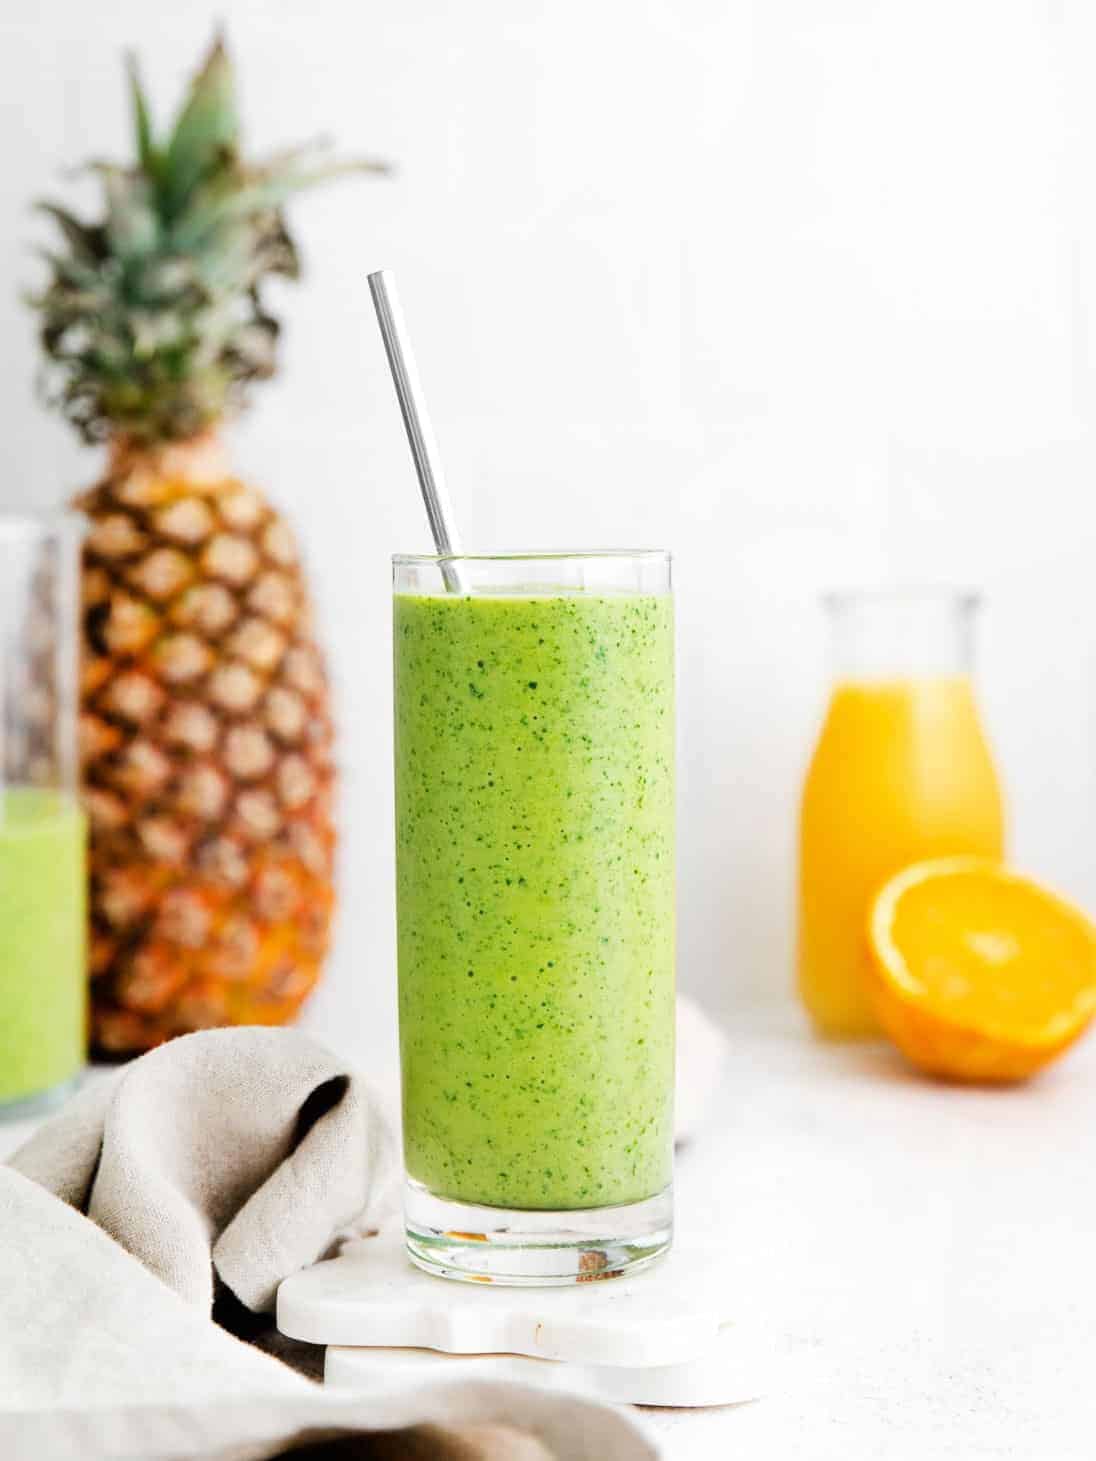 Tropical Spinach Smoothie